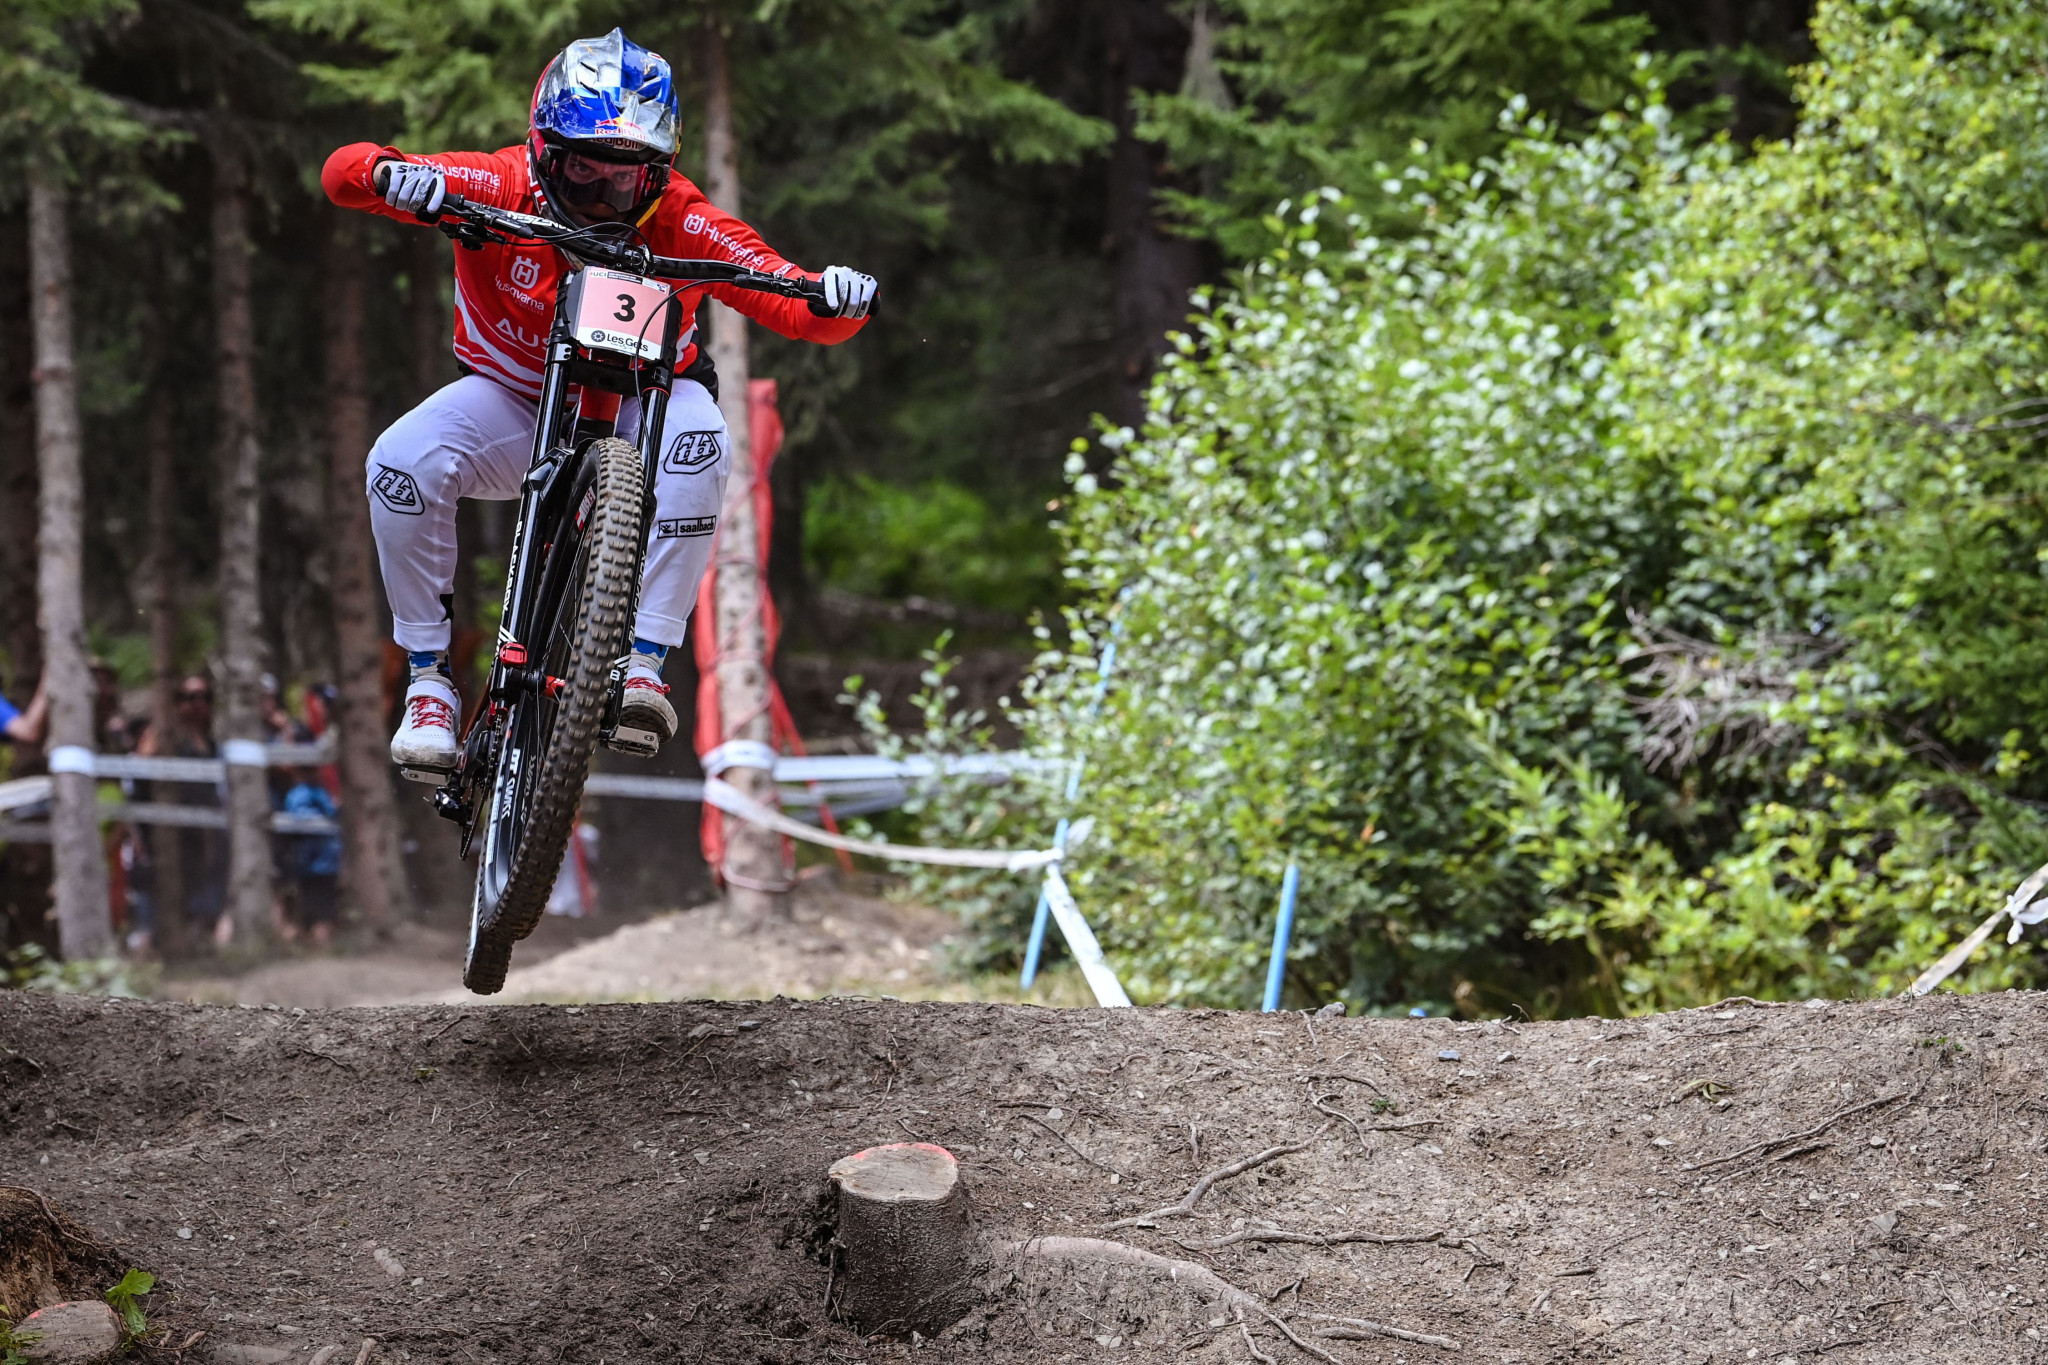 Höll makes history for Austria, Bruni claims fifth world title at Mountain Bike World Championships